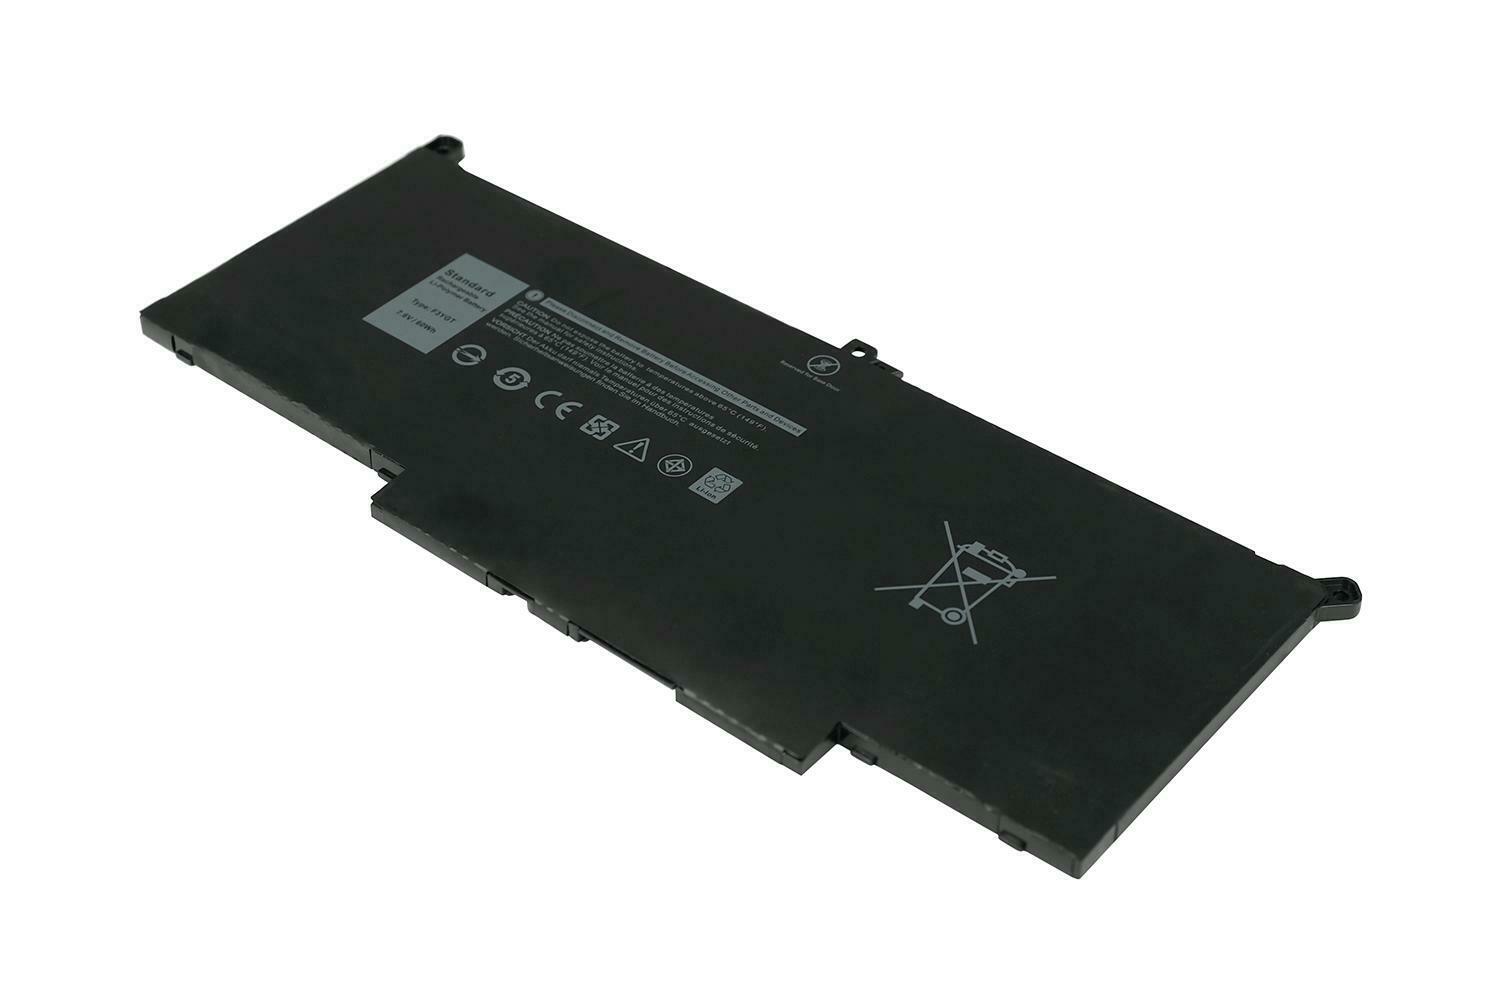 Accu voor 7.6V F3YGT MYJ96 DM3WC 2X39G Dell Latitude 7280 7480 7380 7390 7490(compatible)